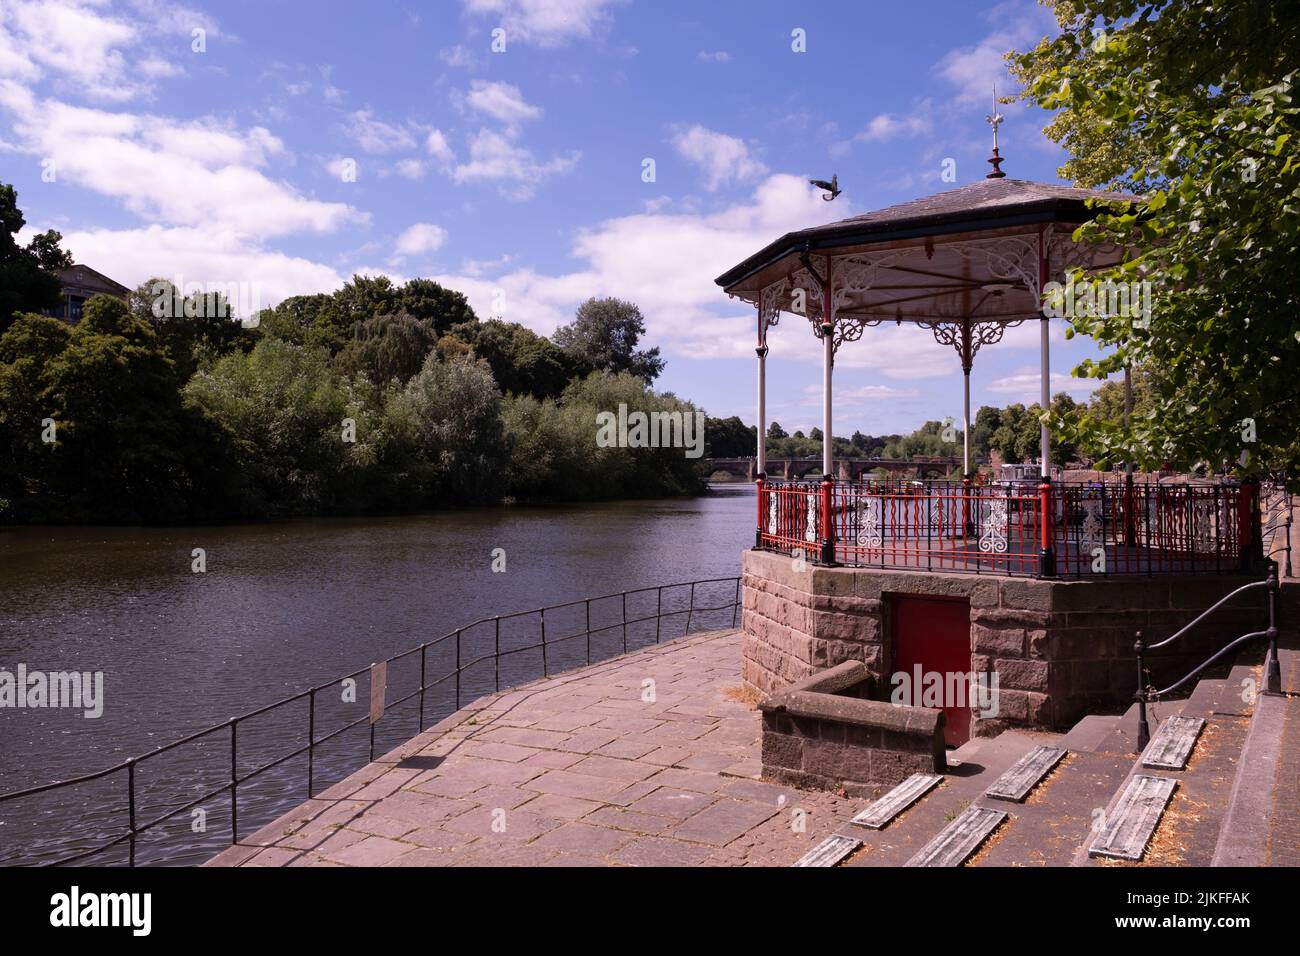 Bandstand at The Groves on the River Dee at Chester, Chesire Stock Photo